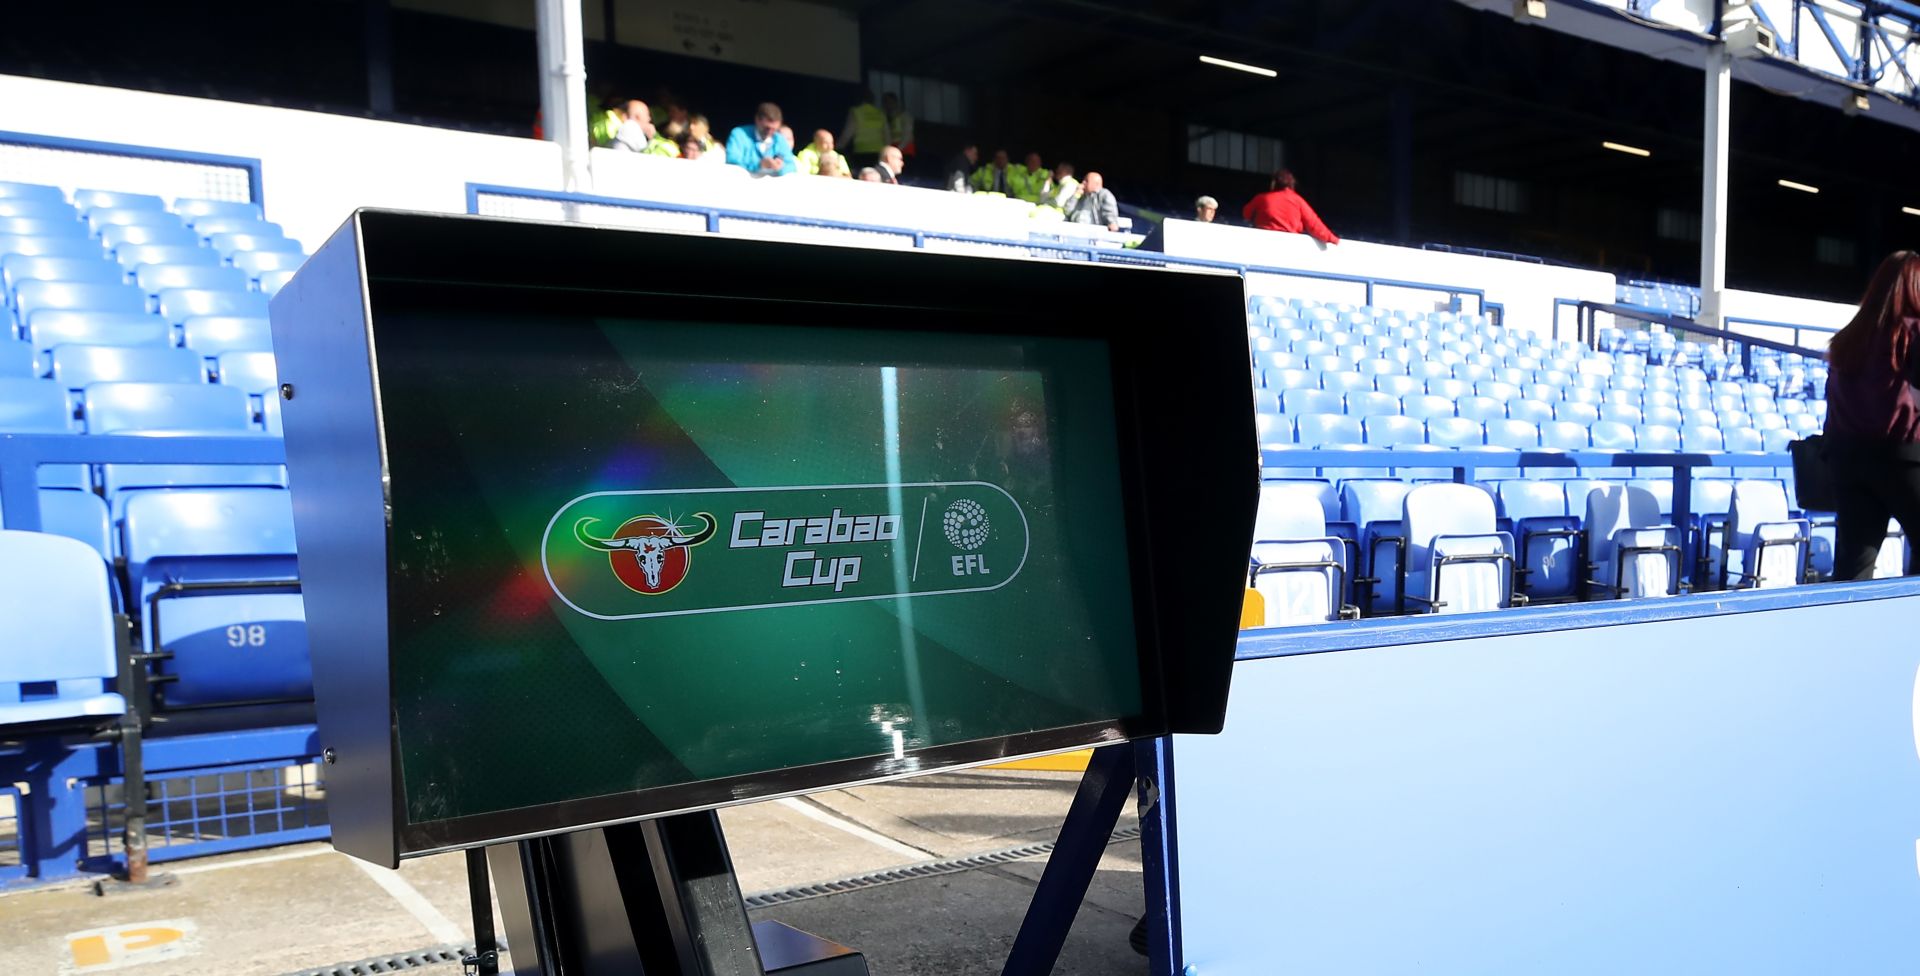 Everton v Rotherham United - Carabao Cup - Second Round - Goodison Park VAR television screen pitchside ready for the Carabao Cup, second round match at Goodison Park, Liverpool. PRESS ASSOCIATION Photo. Picture date: Wednesday August 29, 2018. See PA story SOCCER Everton. Photo credit should read: Peter Byrne/PA Wire. RESTRICTIONS: EDITORIAL USE ONLY No use with unauthorised audio, video, data, fixture lists, club/league logos or "live" services. Online in-match use limited to 120 images, no video emulation. No use in betting, games or single club/league/player publications. Peter Byrne  Photo: Press Association/PIXSELL